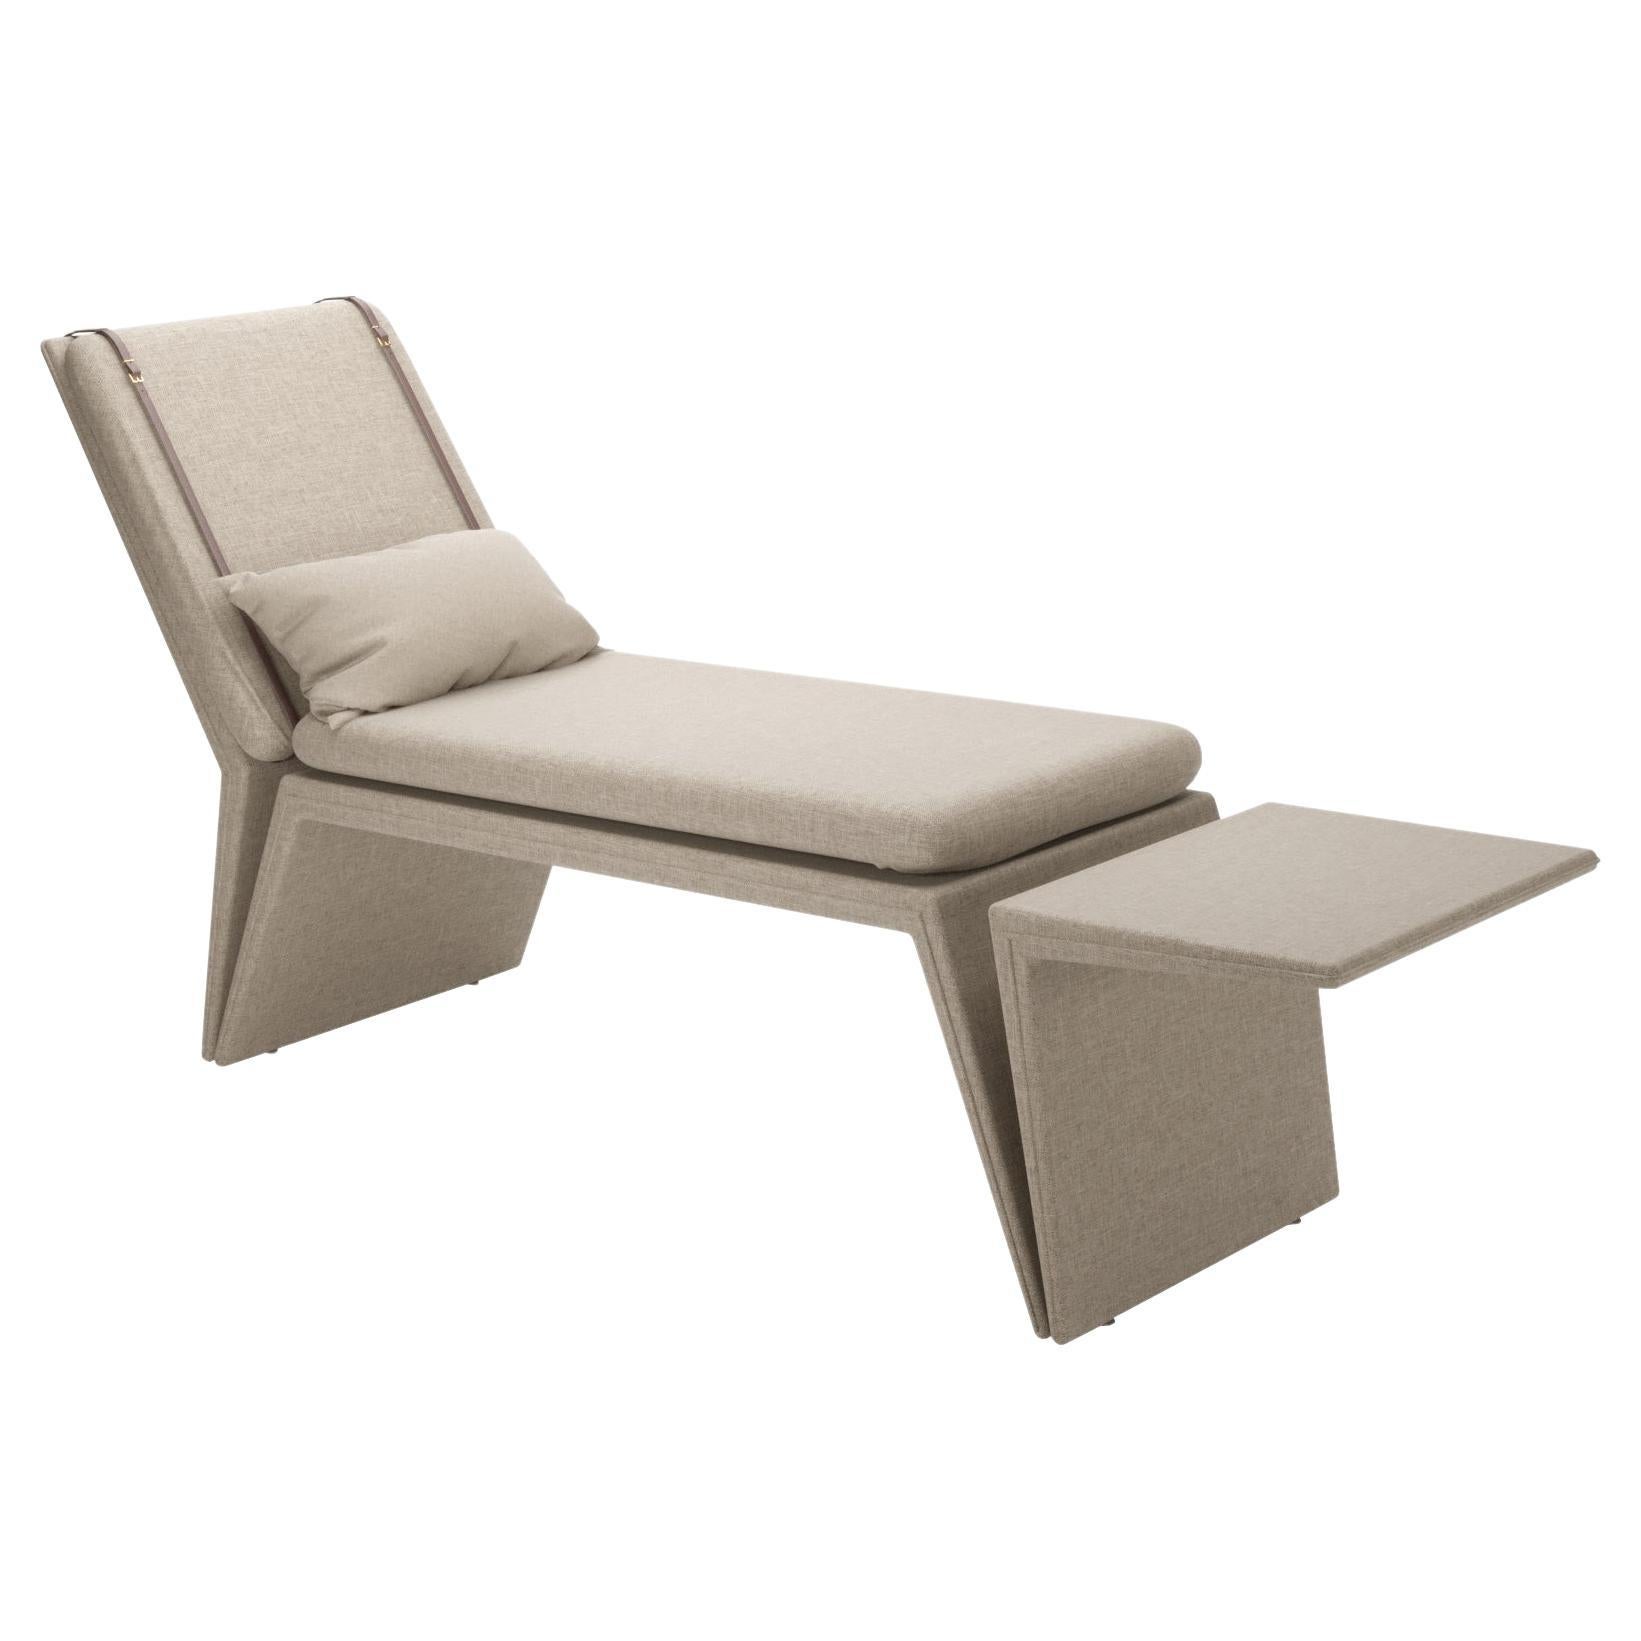 Natural Linen Modern Panama Chaise Longue For Sale